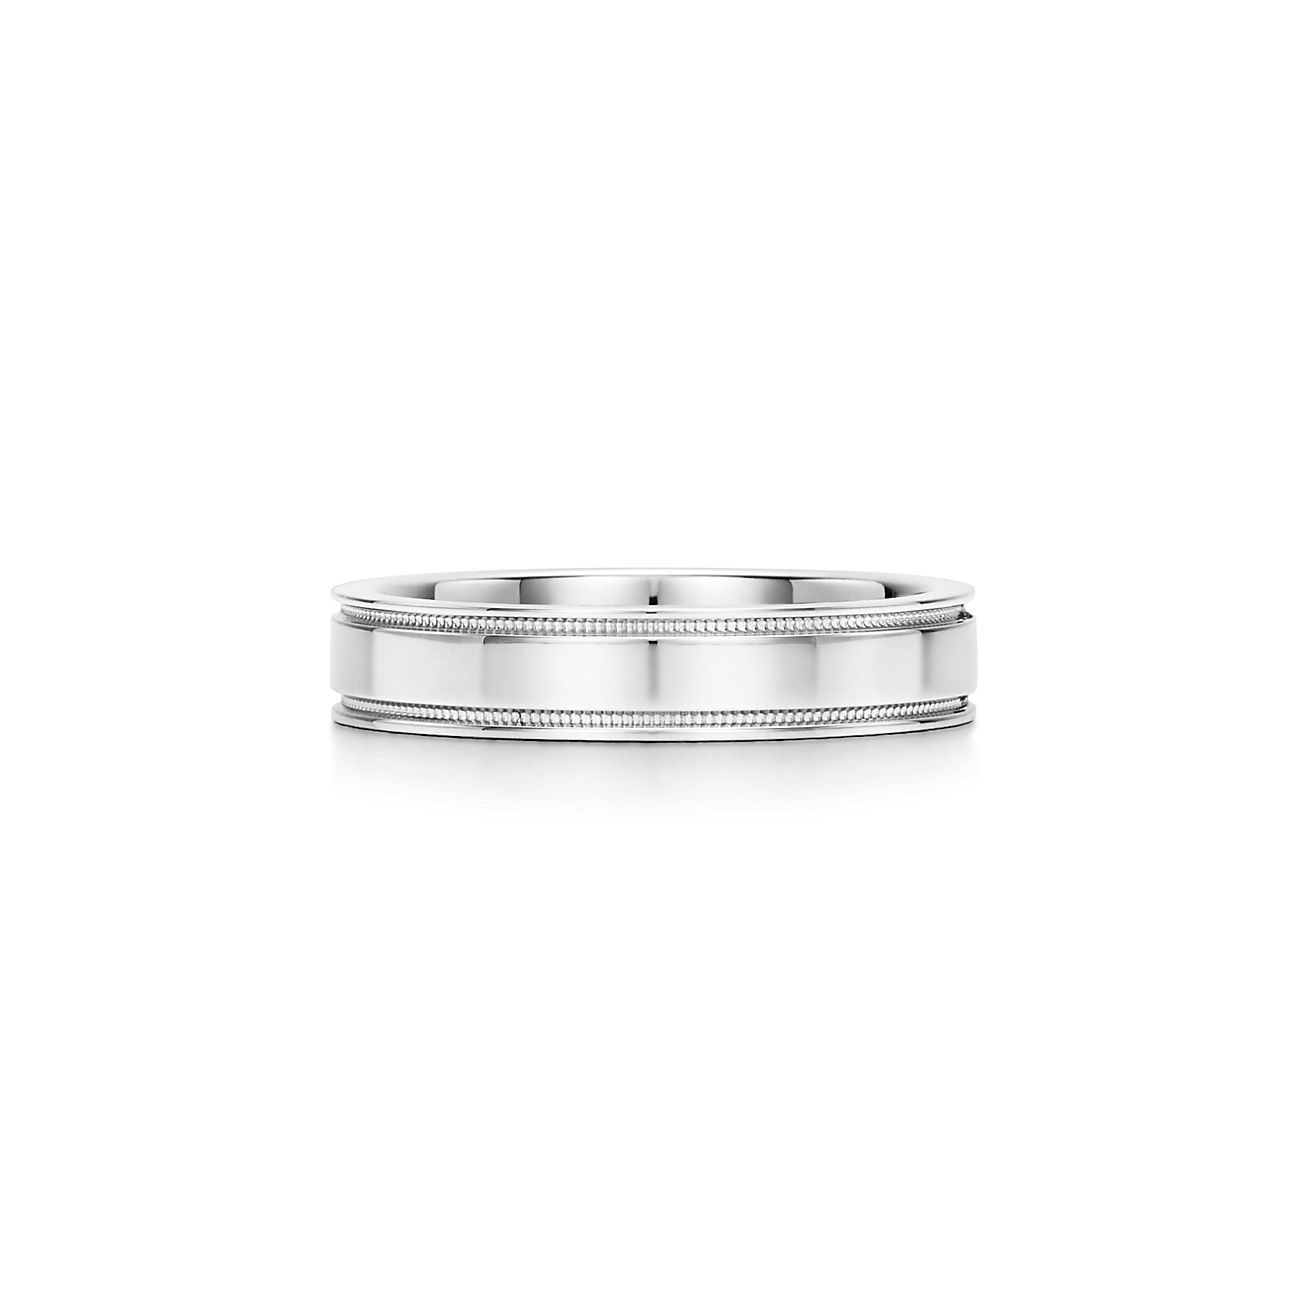 Tiffany Together Double Milgrain Band Ring in Platinum, 4 mm Wide 